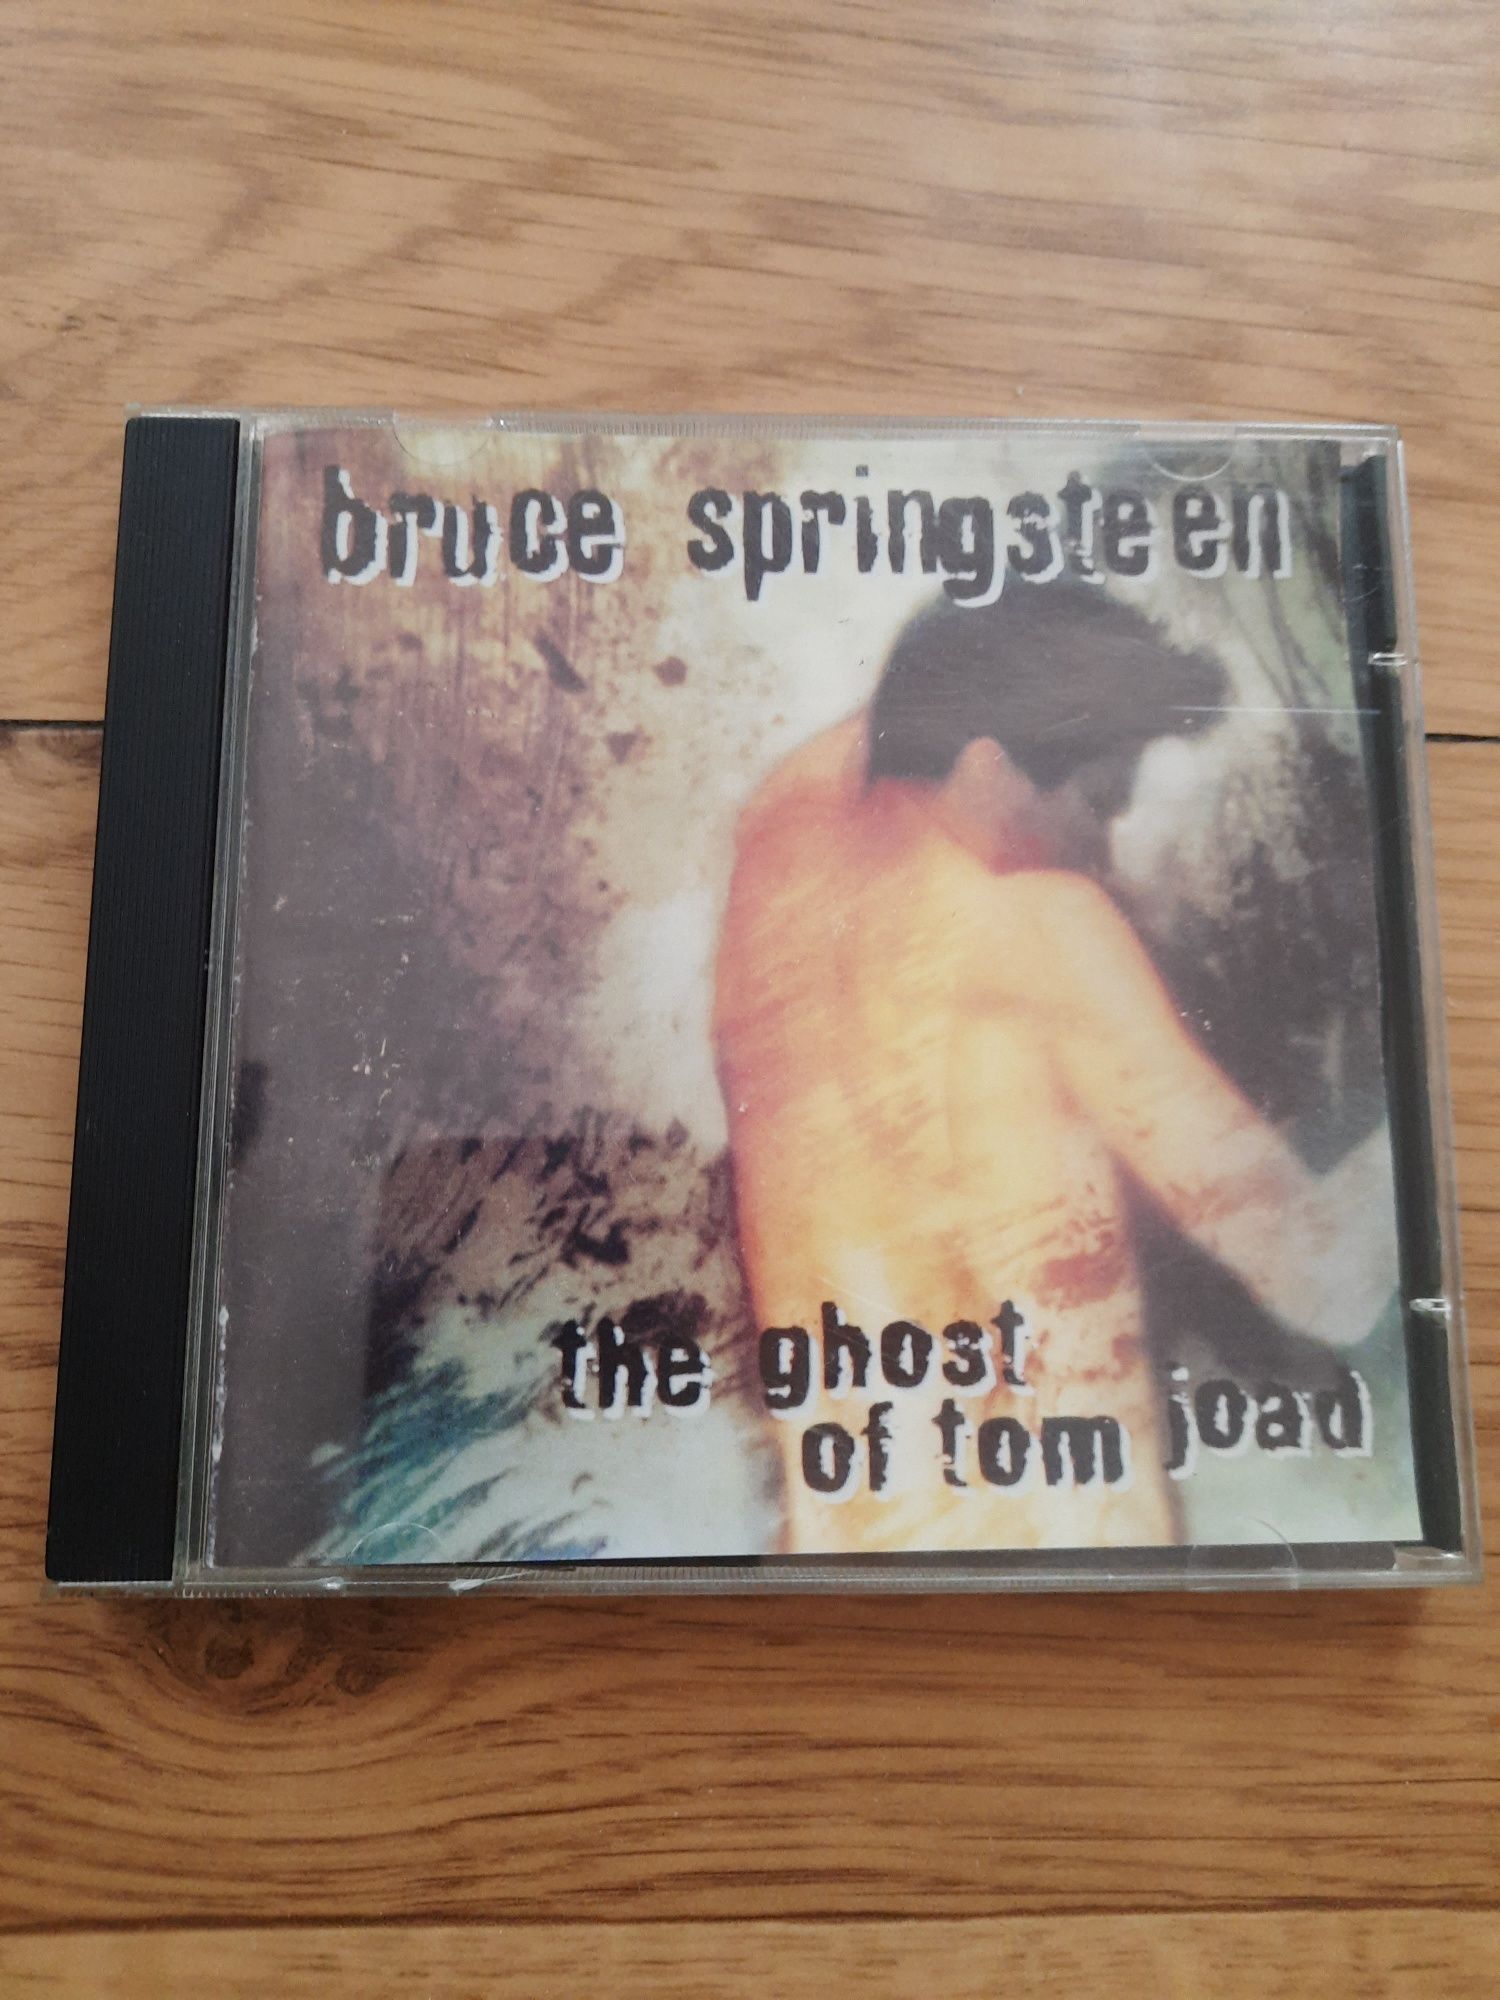 Bruce Springsteen "The Ghost Of Tom Joad" (opis)